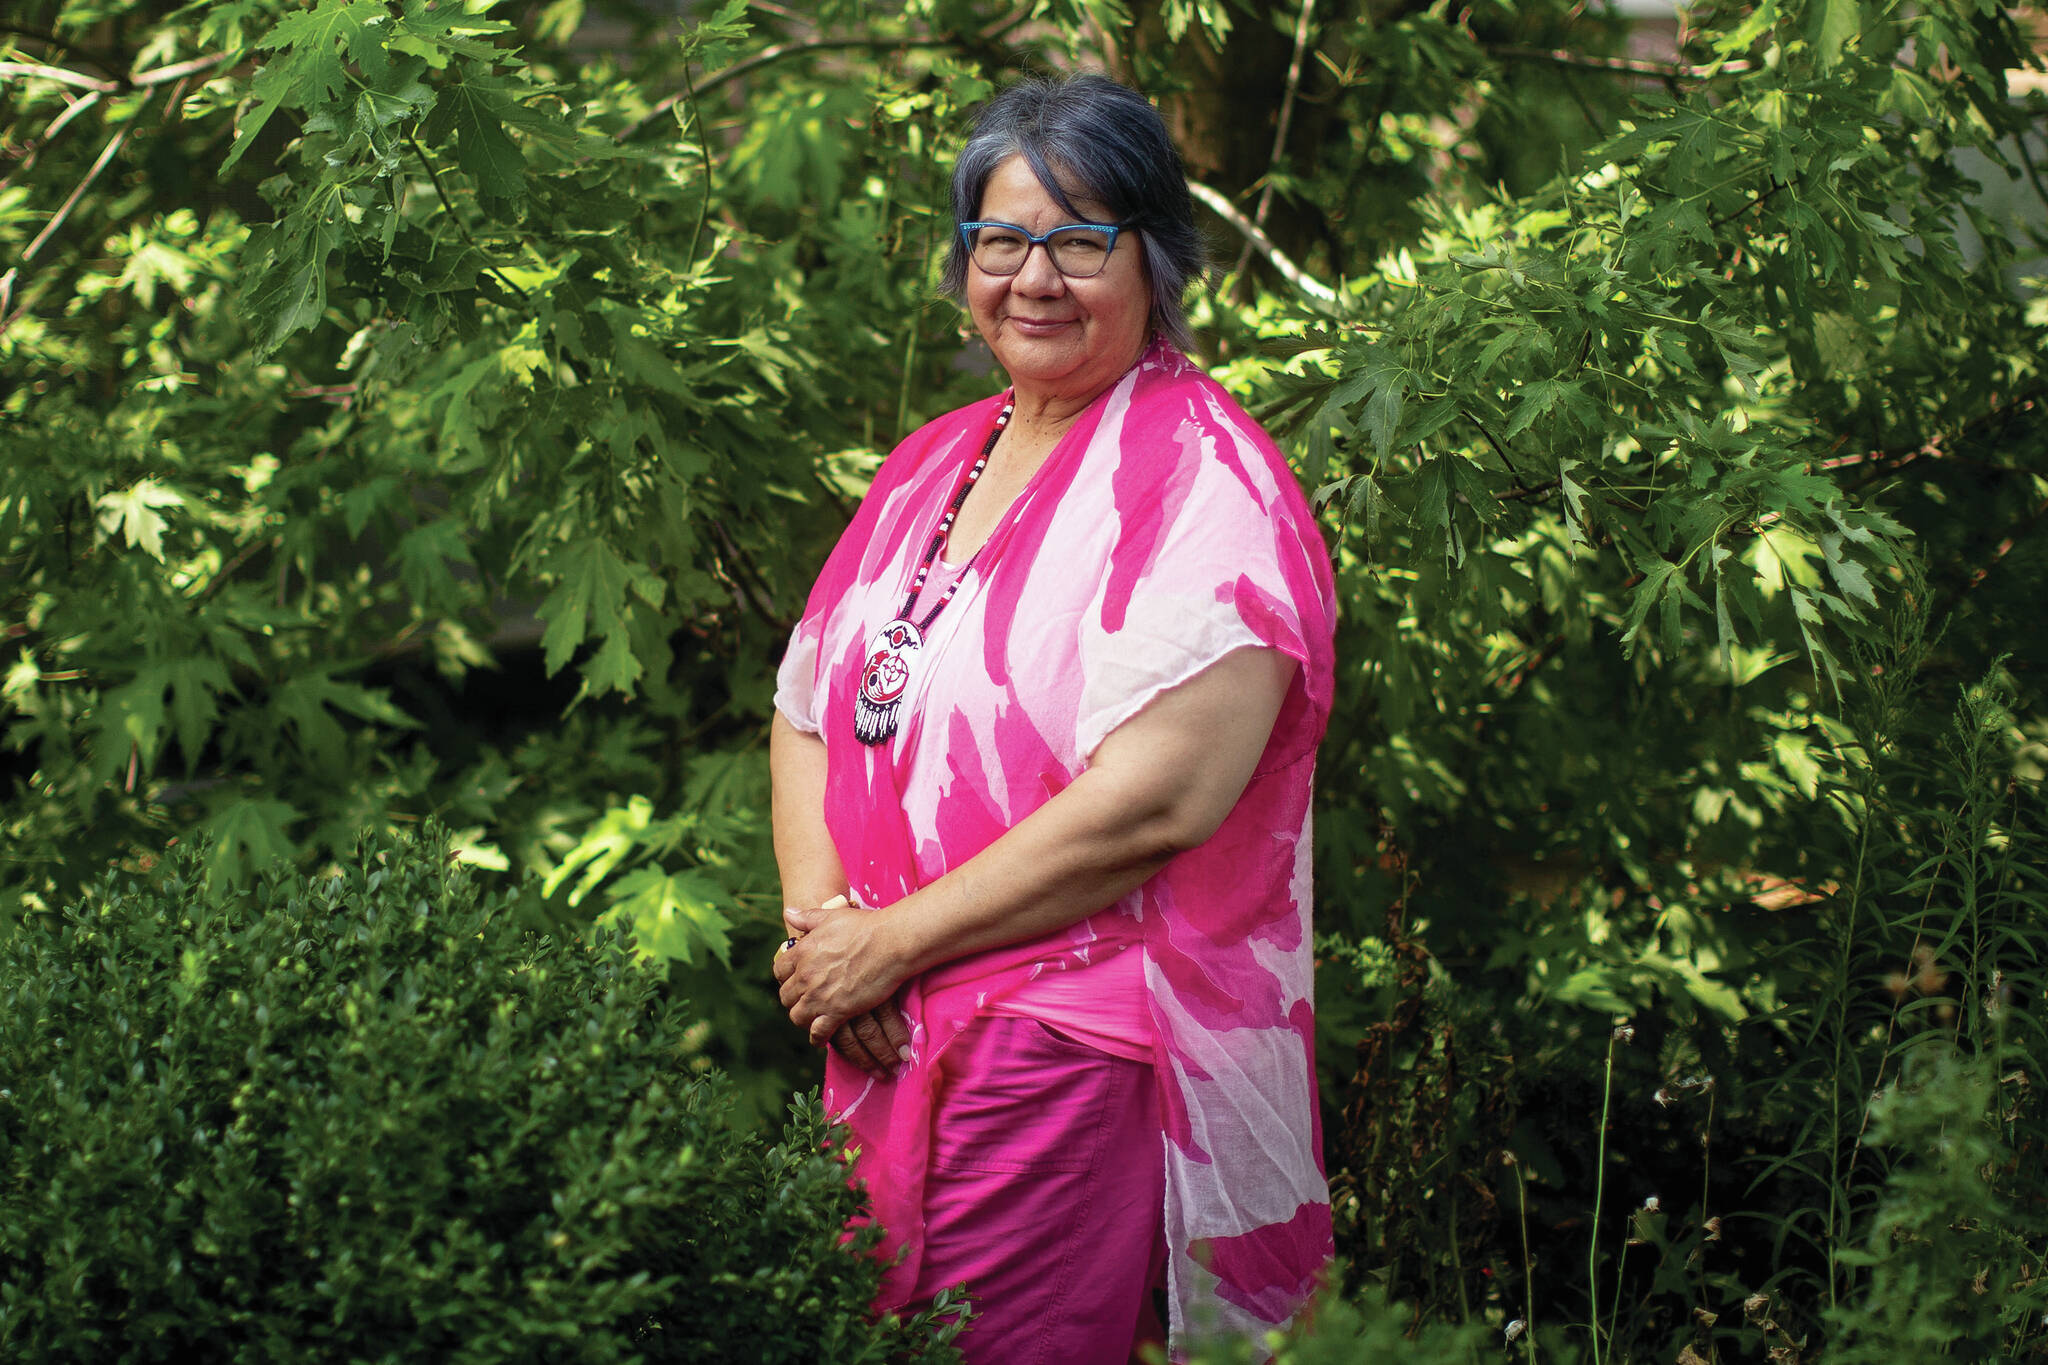 RoseAnne Archibald, the new National Chief of the Assembly of First Nations, is photographed in Toronto on Friday, August 6, 2021. THE CANADIAN PRESS/Chris Young